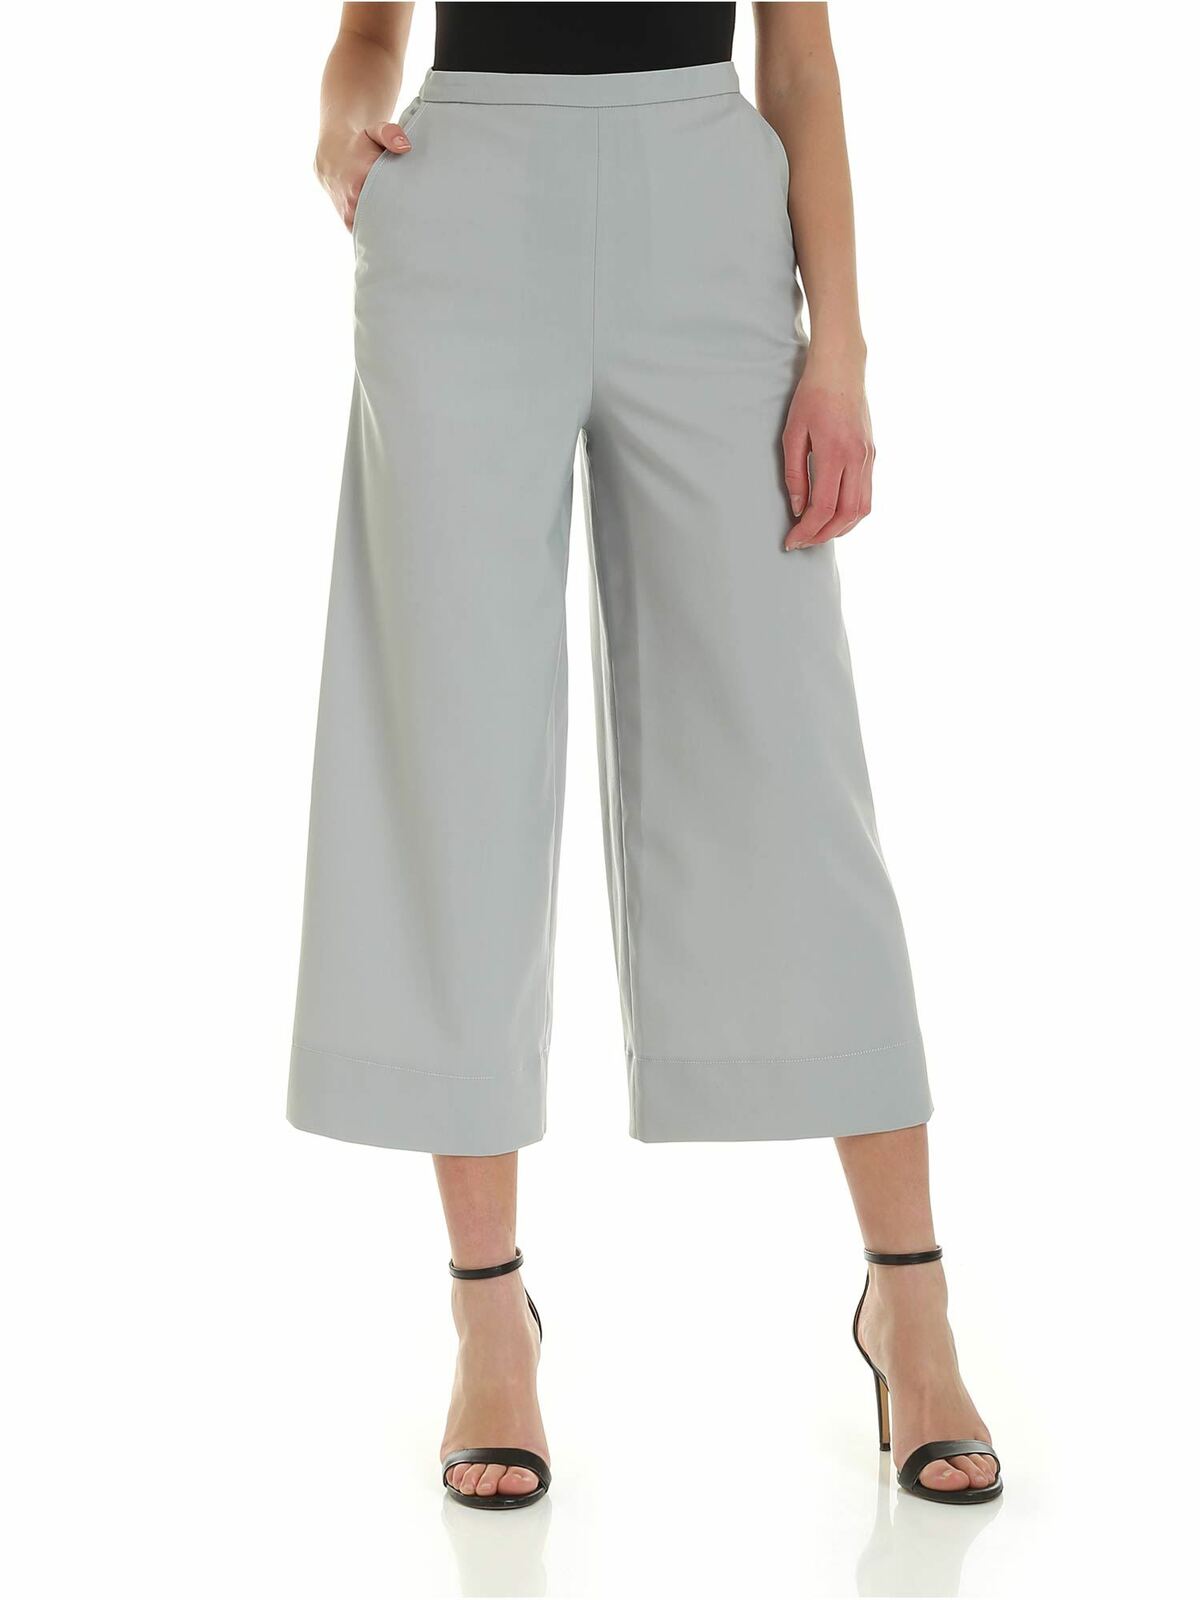 See By Chloé Cold Grey Culottes Trousers In Grey